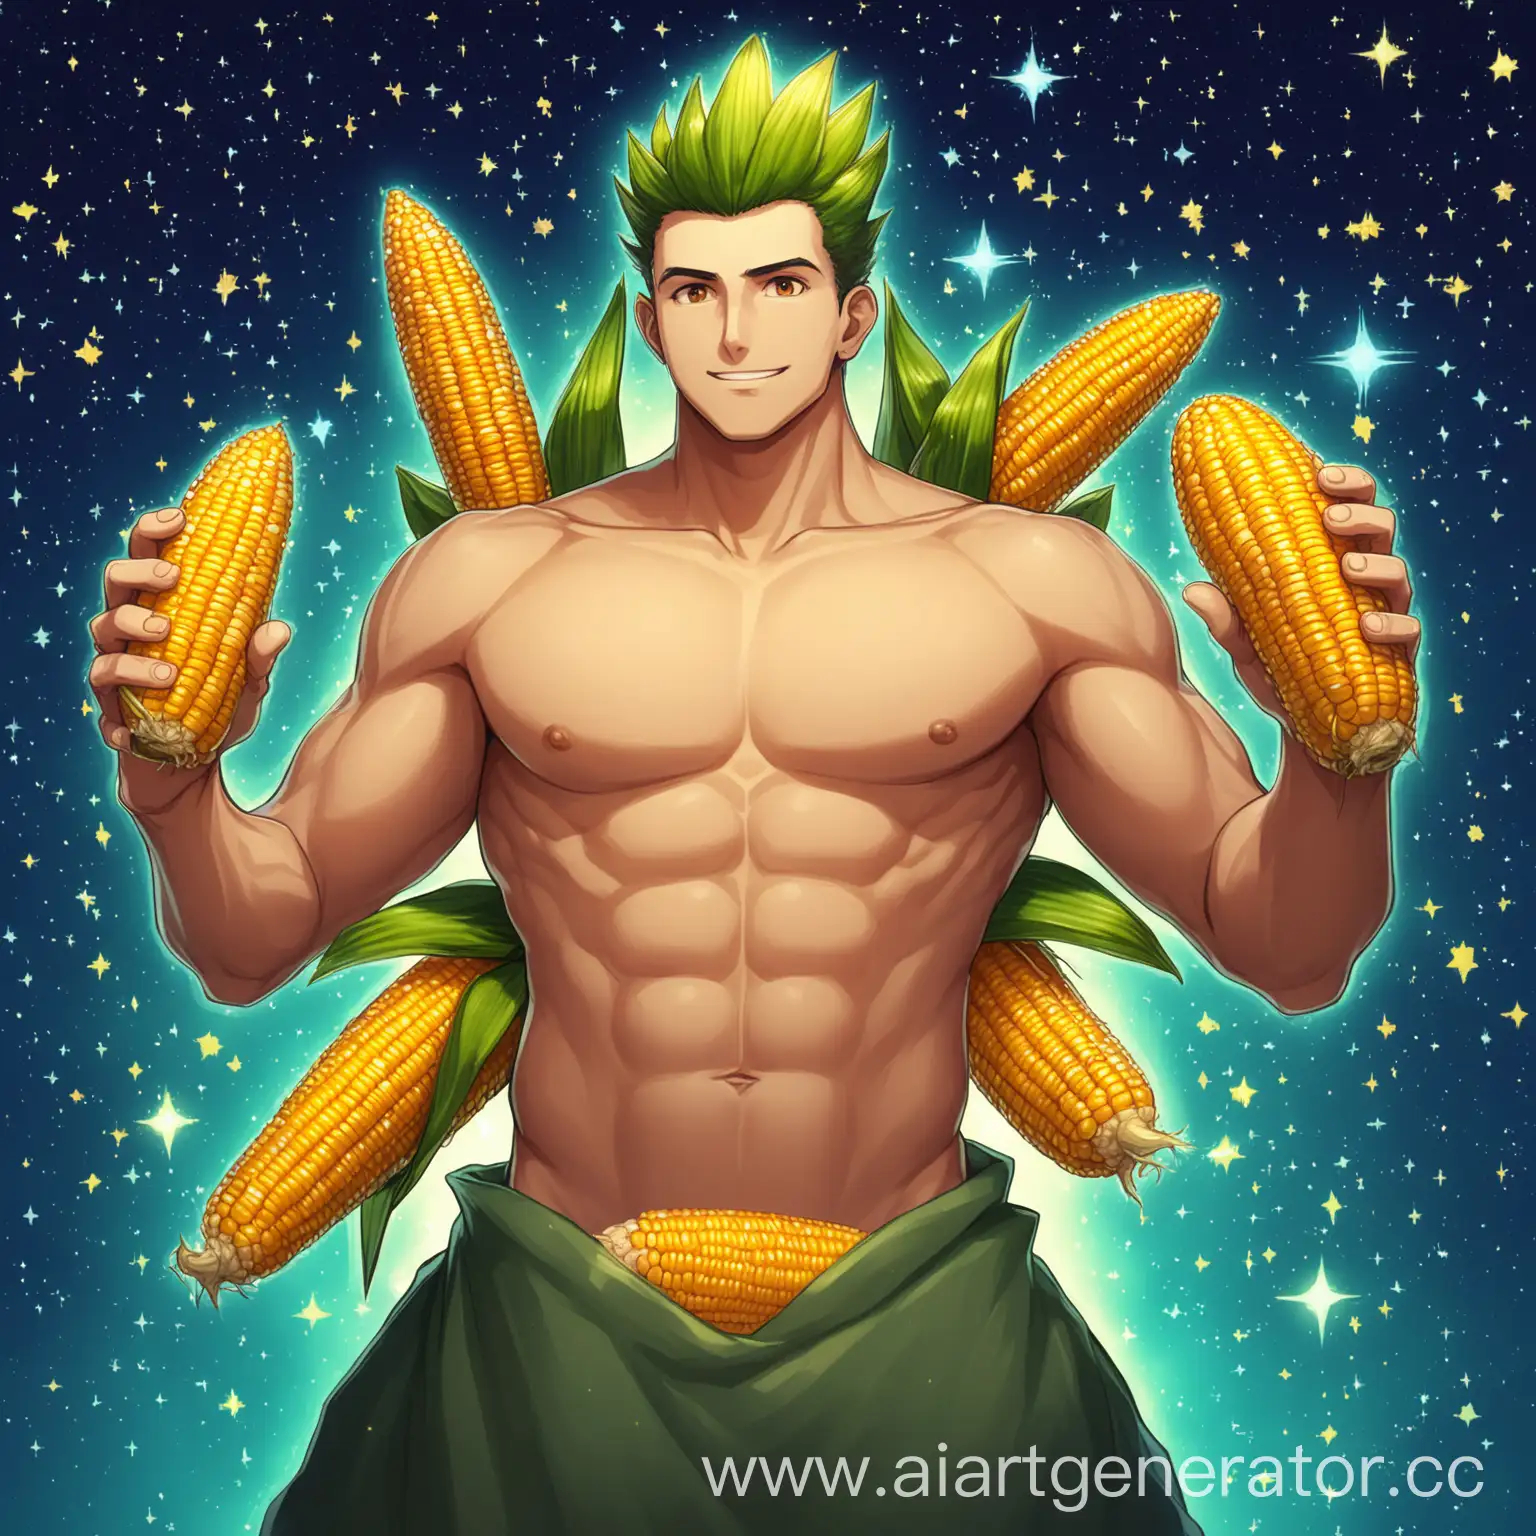 A guy with a bare torso, holding corn in his hands, is playing bravl stars